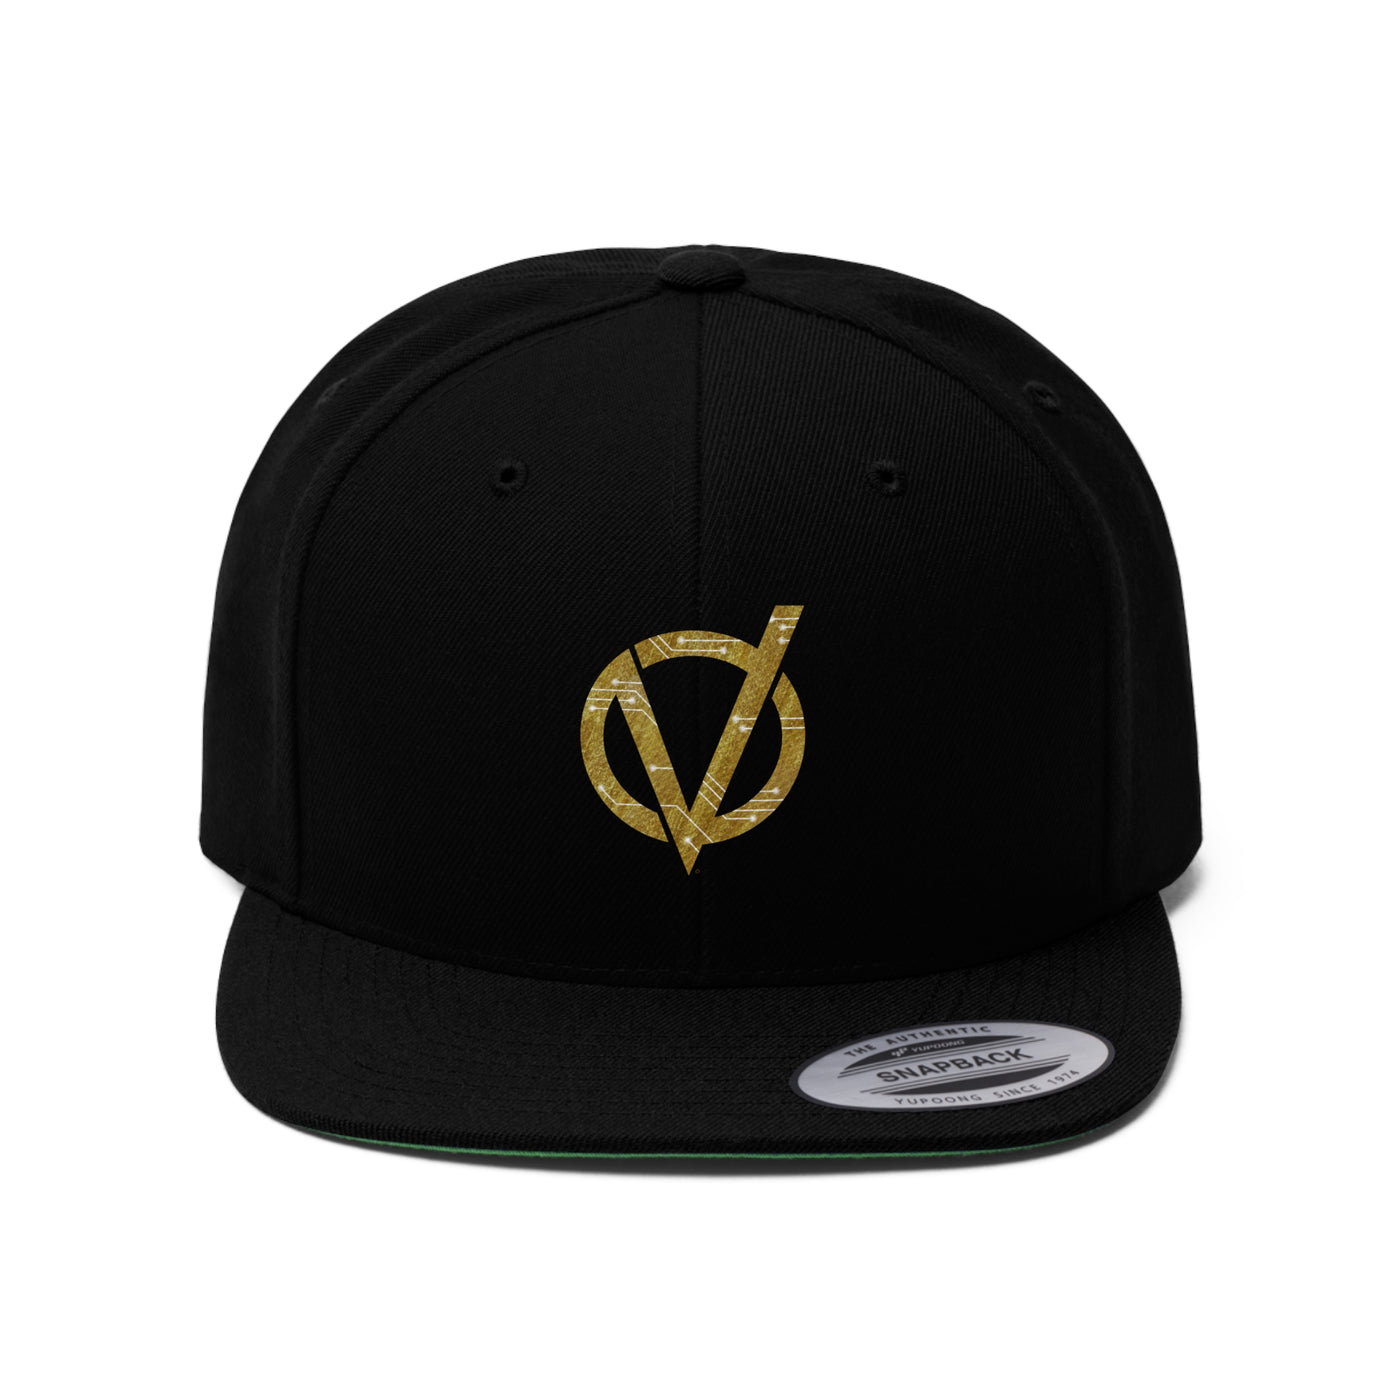 Embroidered Circuit V Logo Unisex Flat Bill Snapback Hat with Old School Green Underbill